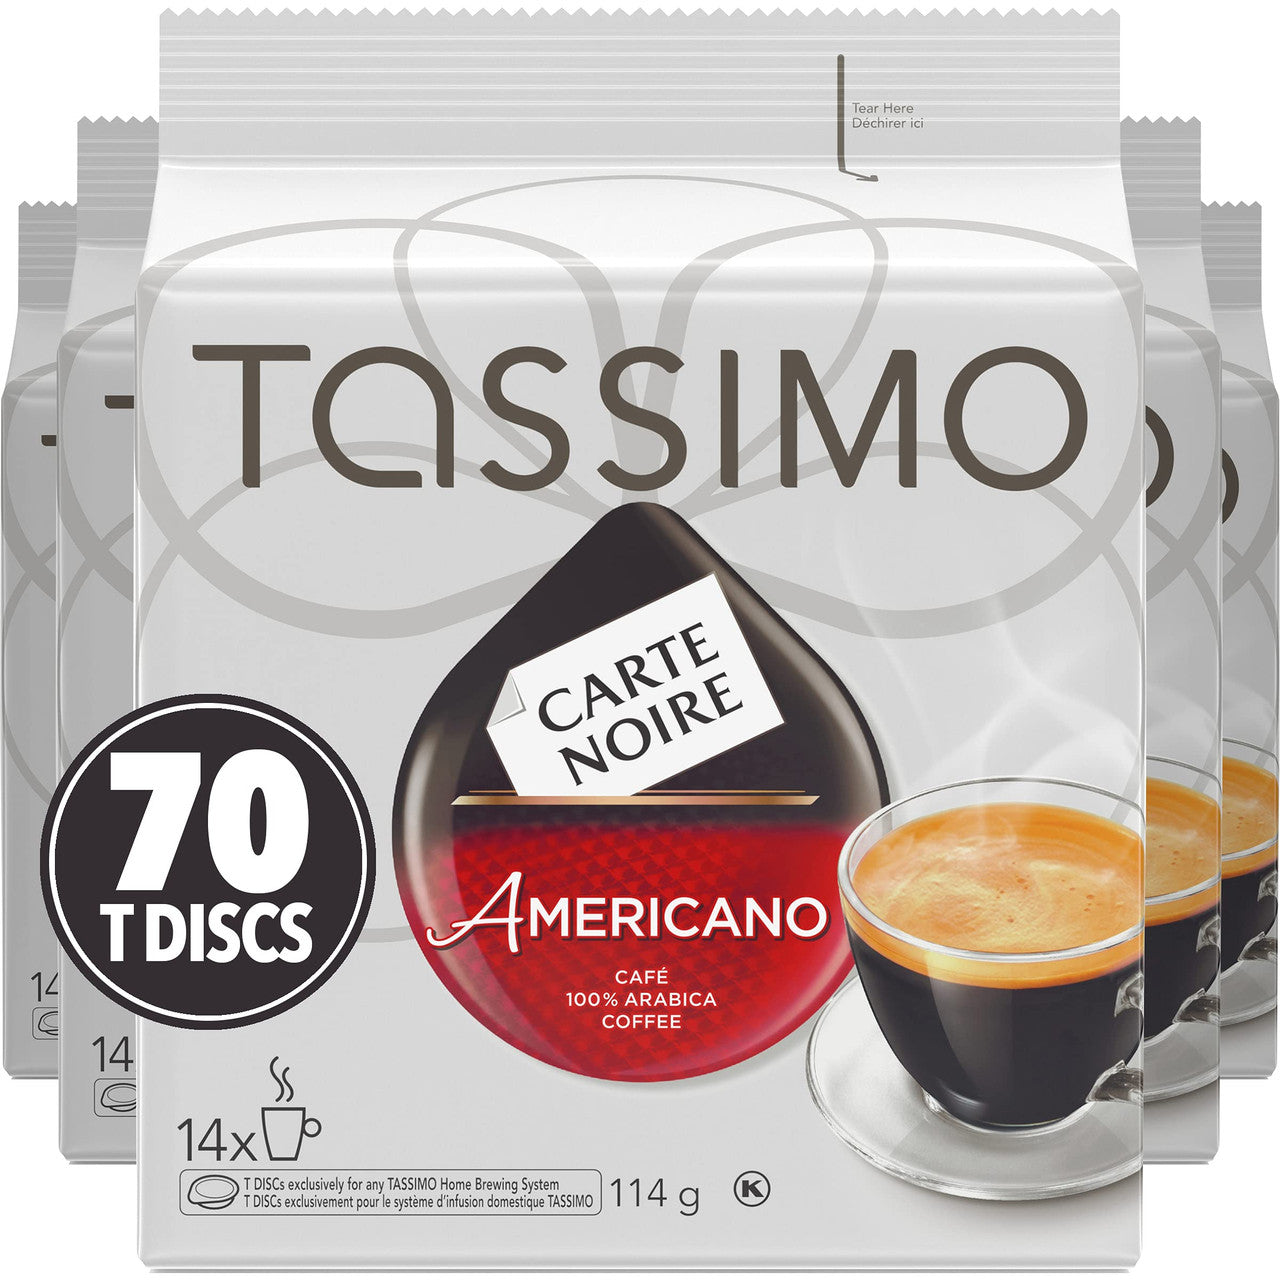 Tassimo Carte Noire Americano Coffee, 70 T-Discs (5 Boxes of 14 T-Discs) {Imported from Canada}